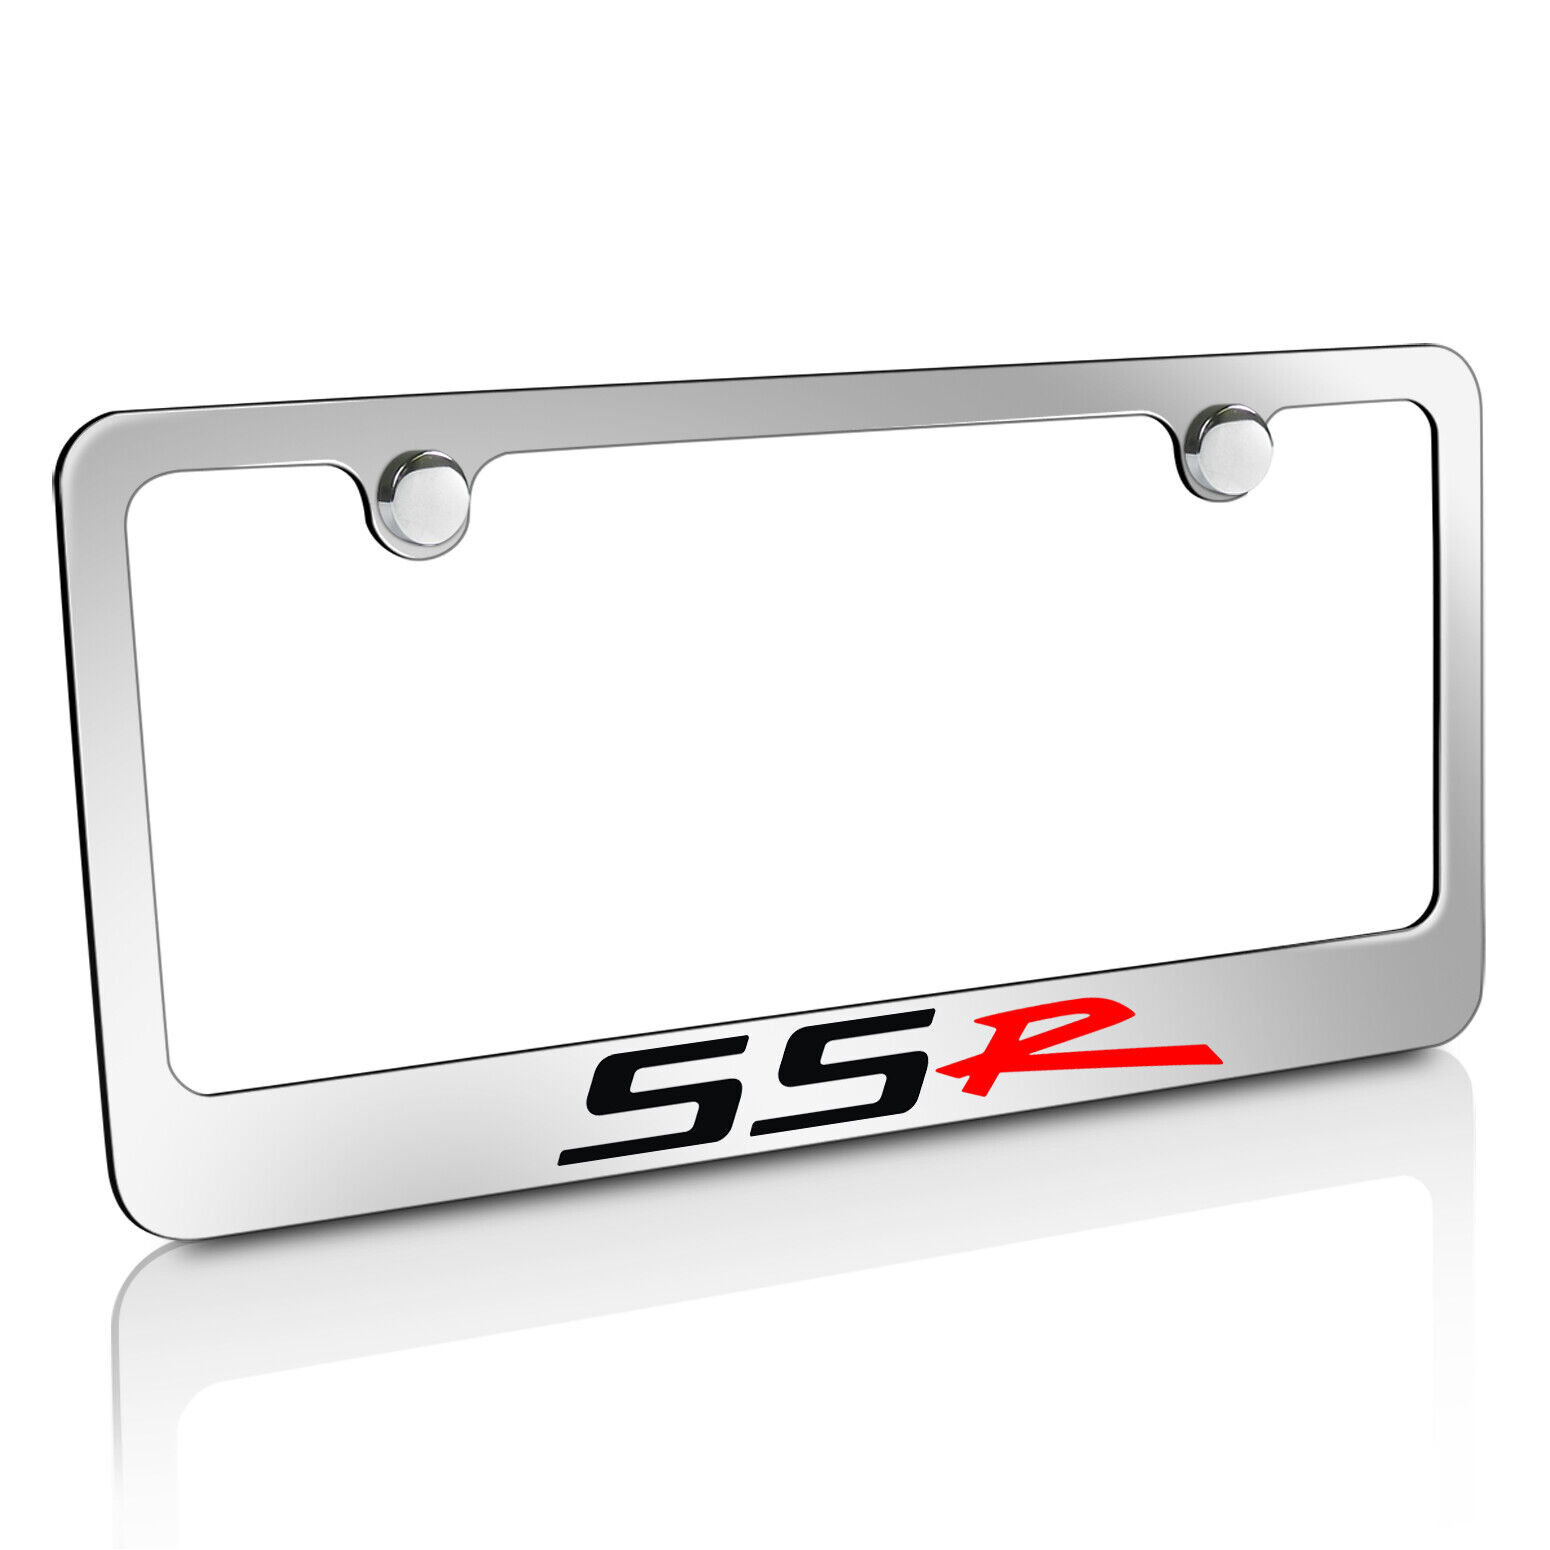 Chevrolet SSR Shiny Mirror Chrome Finish Solid Brass Metal License Plate Frame